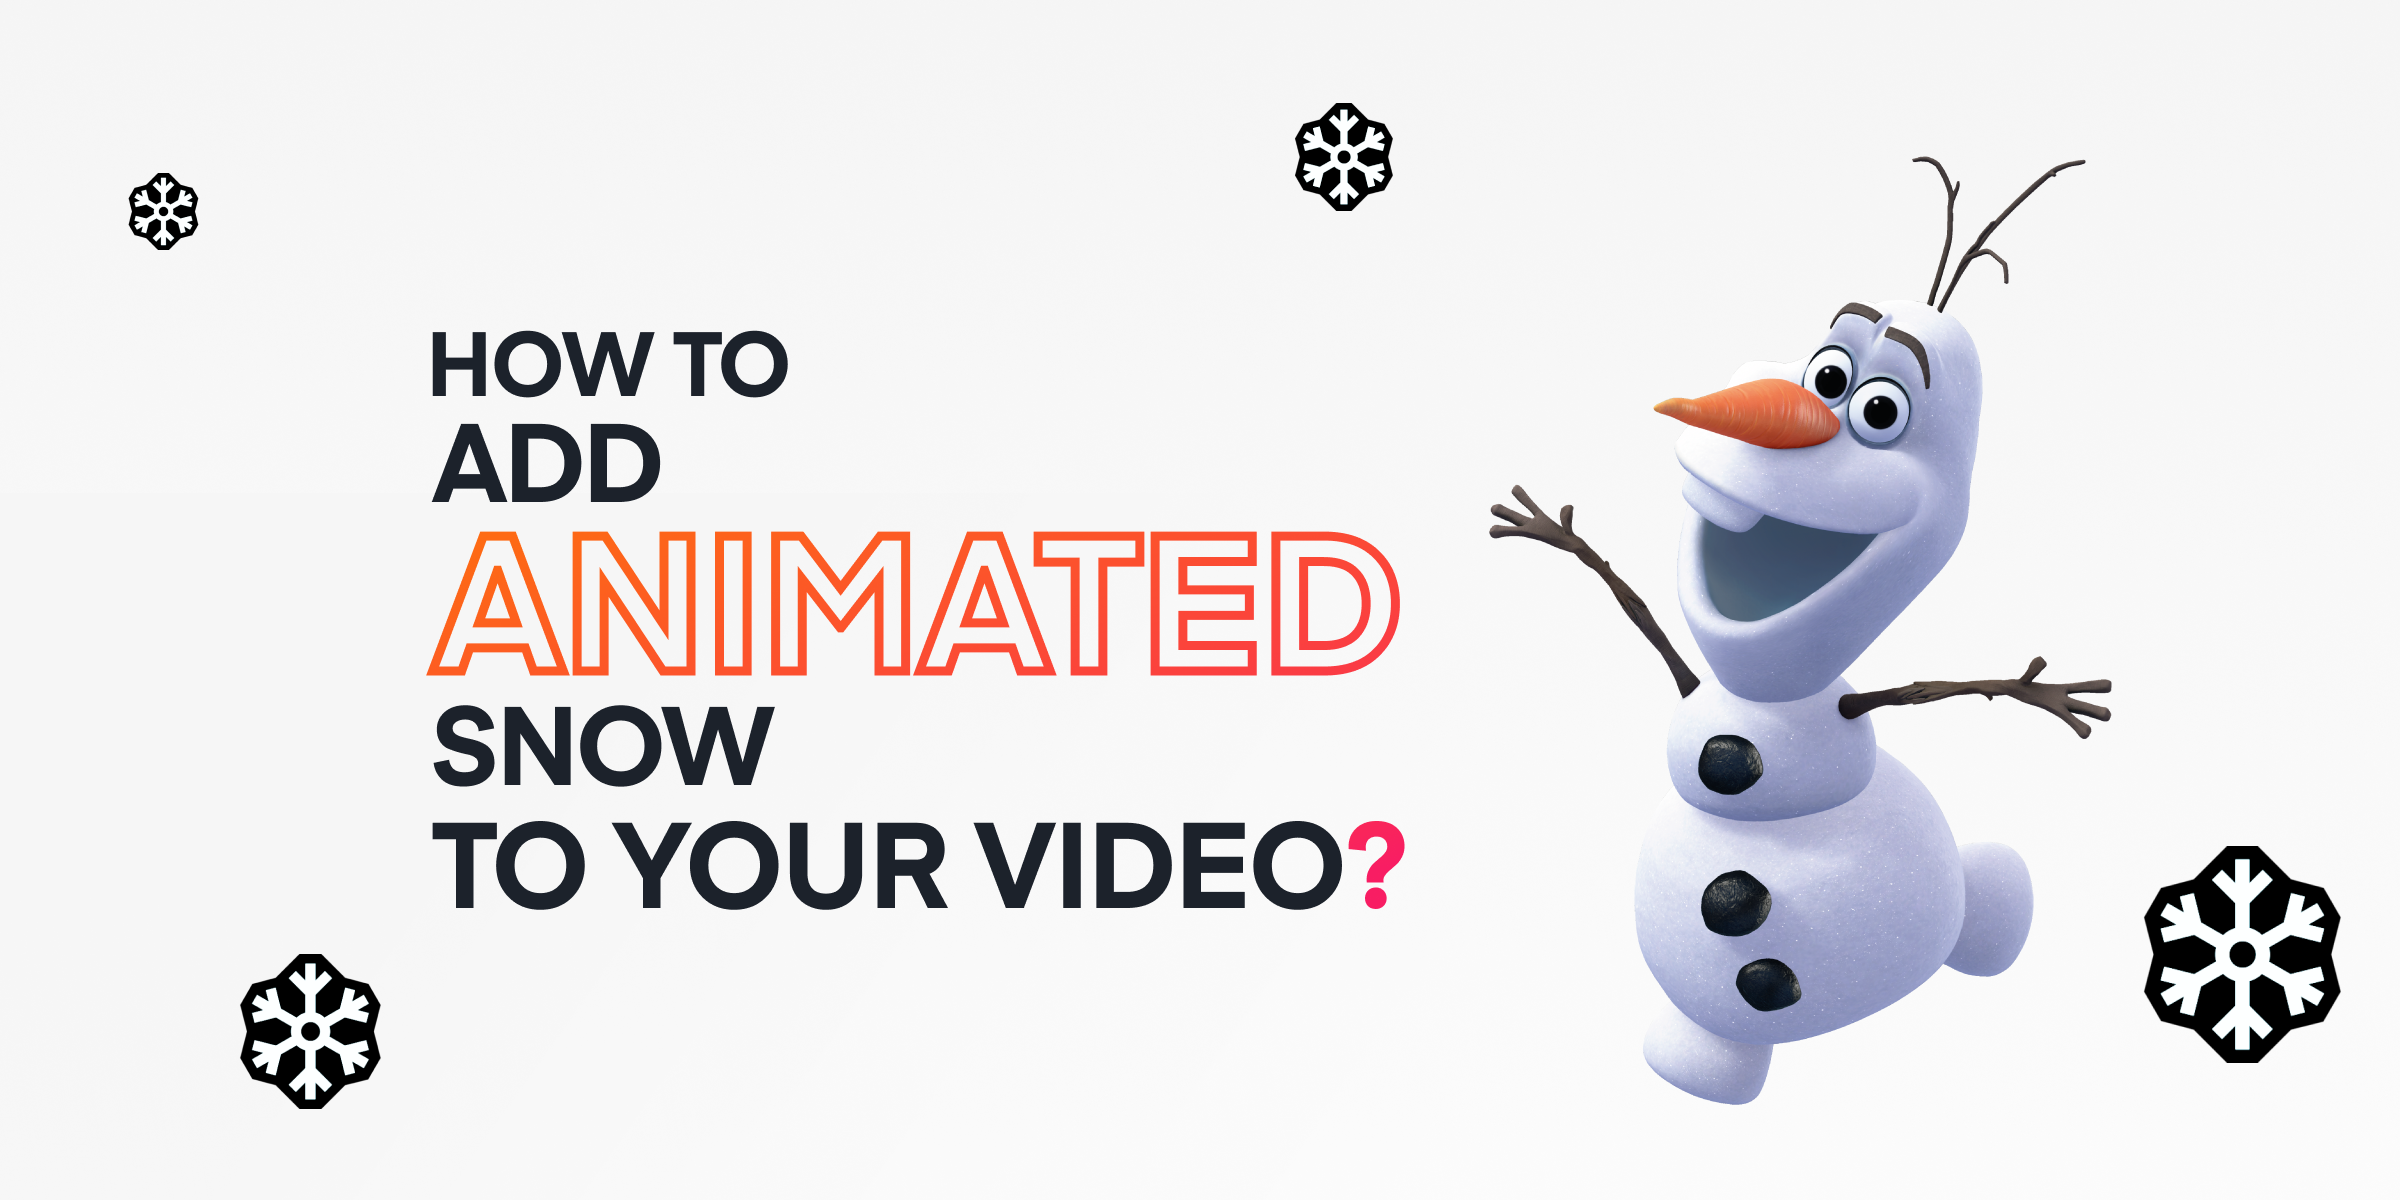 How to Add Animated Snow to Your Video - ANIMOTICA Blog